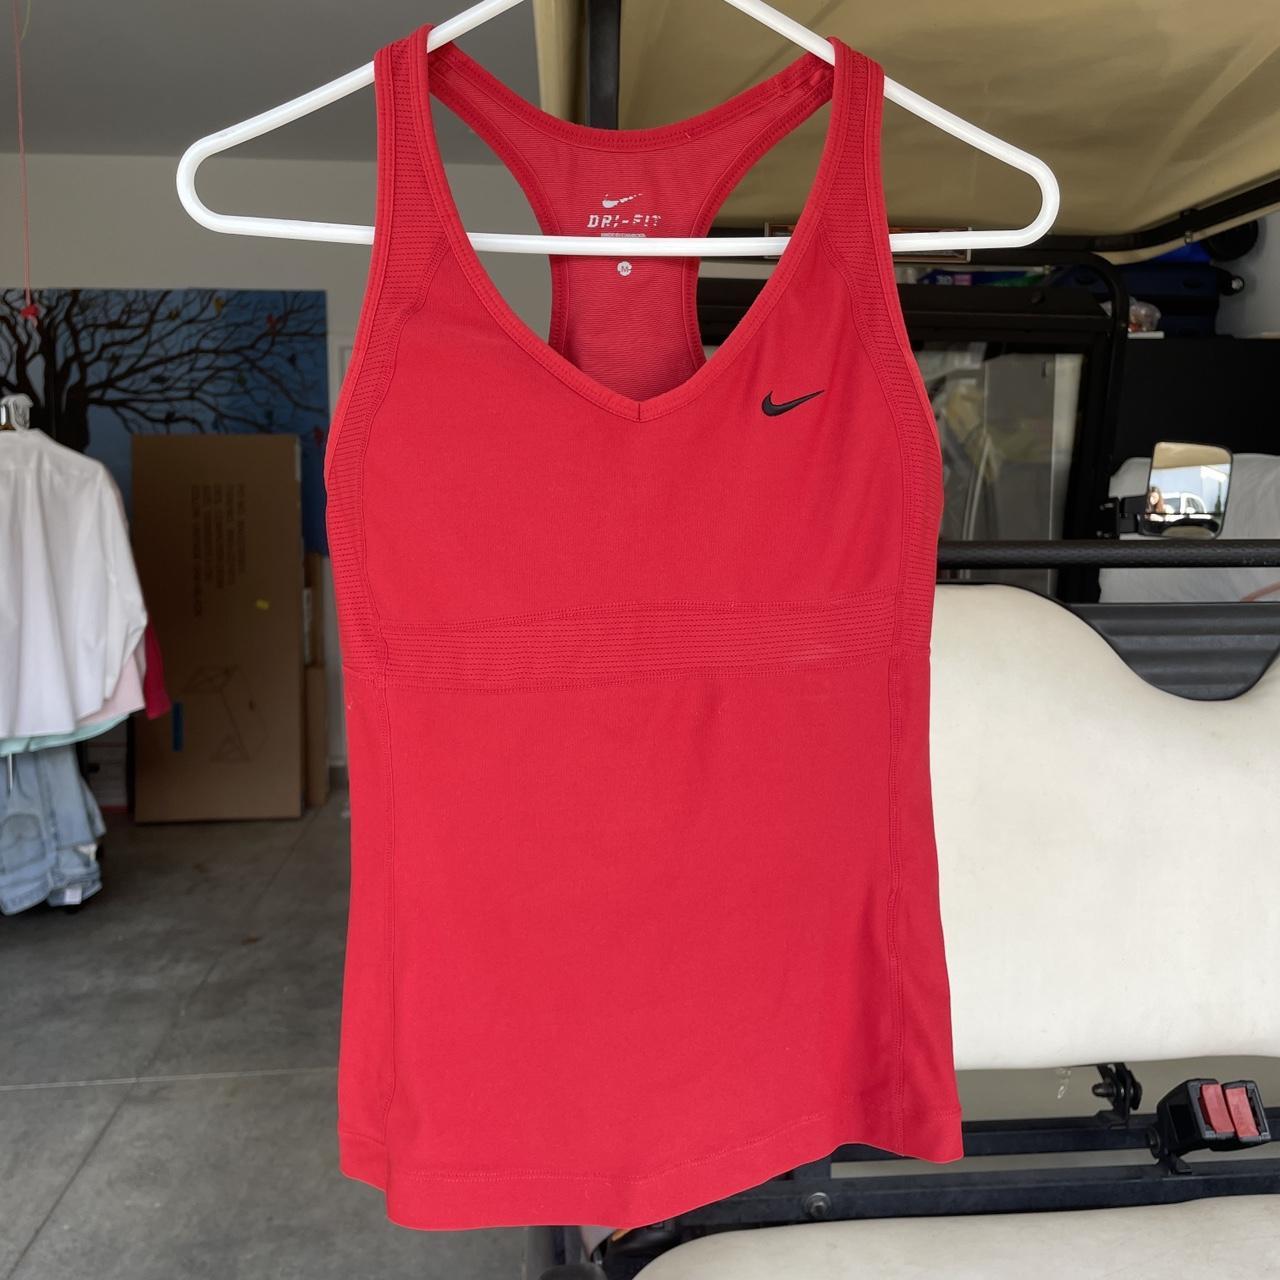 NIKE DRI FIT RED WORKOUT TANK TOP ❤️ -BUILT IN CAMI - Depop